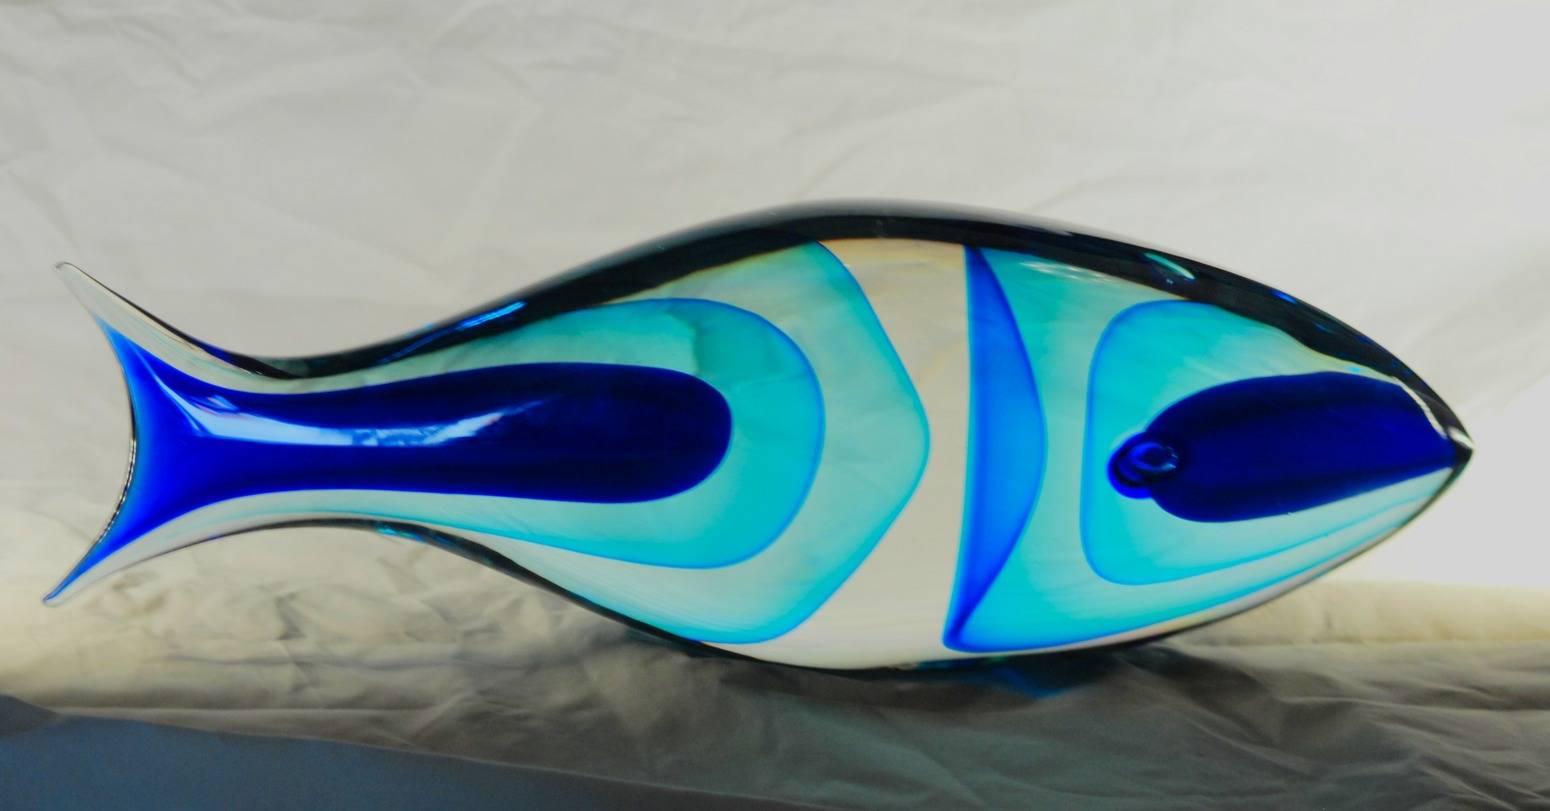 Unique color combination massiccio fish sculpture combining the top skill of Murano glass making, incalmo, Sommerso and sbruffi. Exquisite.

Large massiccio sculptured fish made with the incalmo technique. The two sections constituting the incalmo